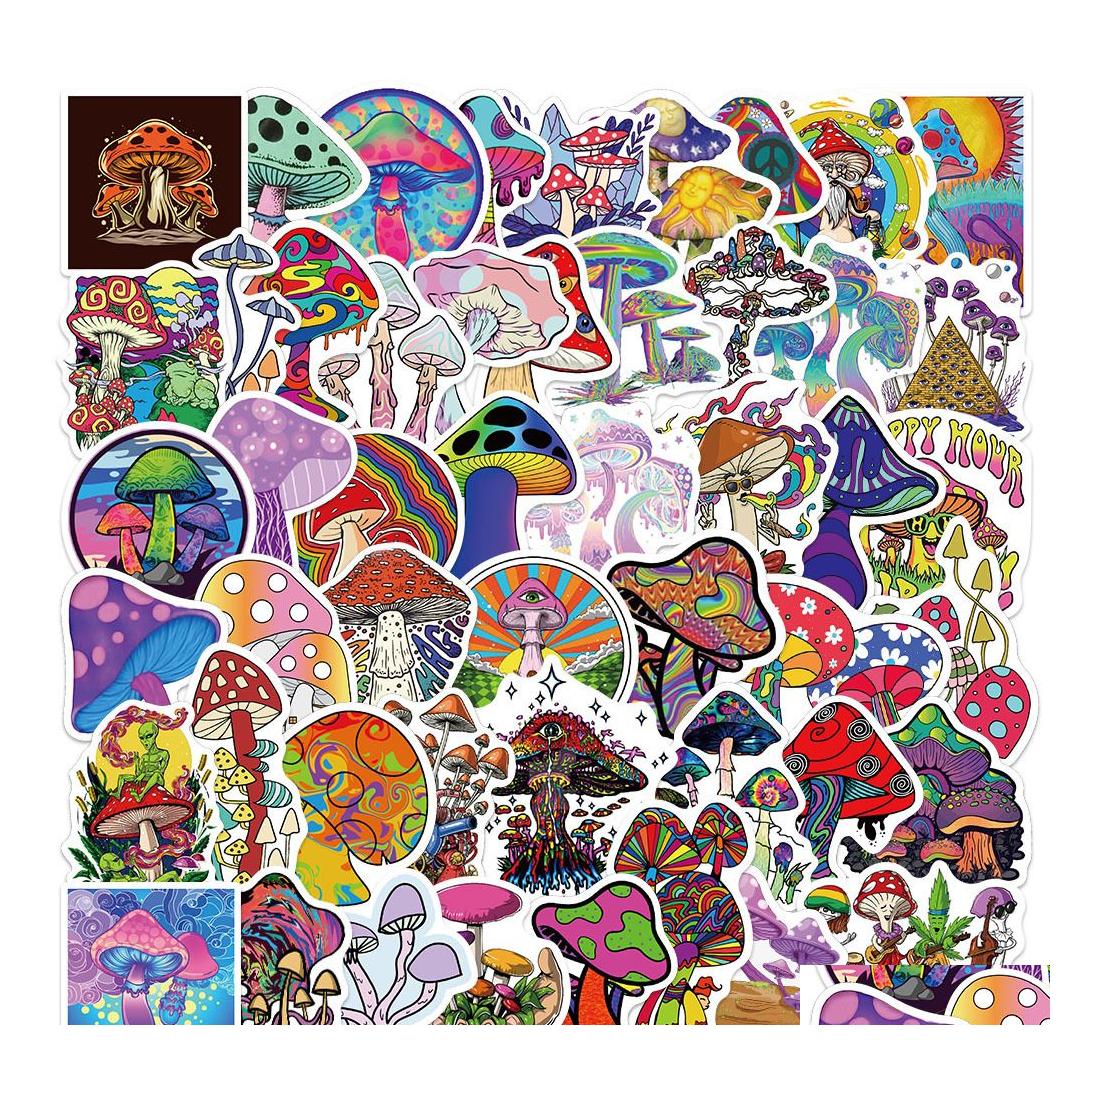 

Car Stickers 50Pcs Psychedelic Aesthetics Mushroom Decal Guitar Motorcycle Lage Suitcase Cartoon Graffiti Sticker Drop Delivery Mobi Dhbz3, Multi colors